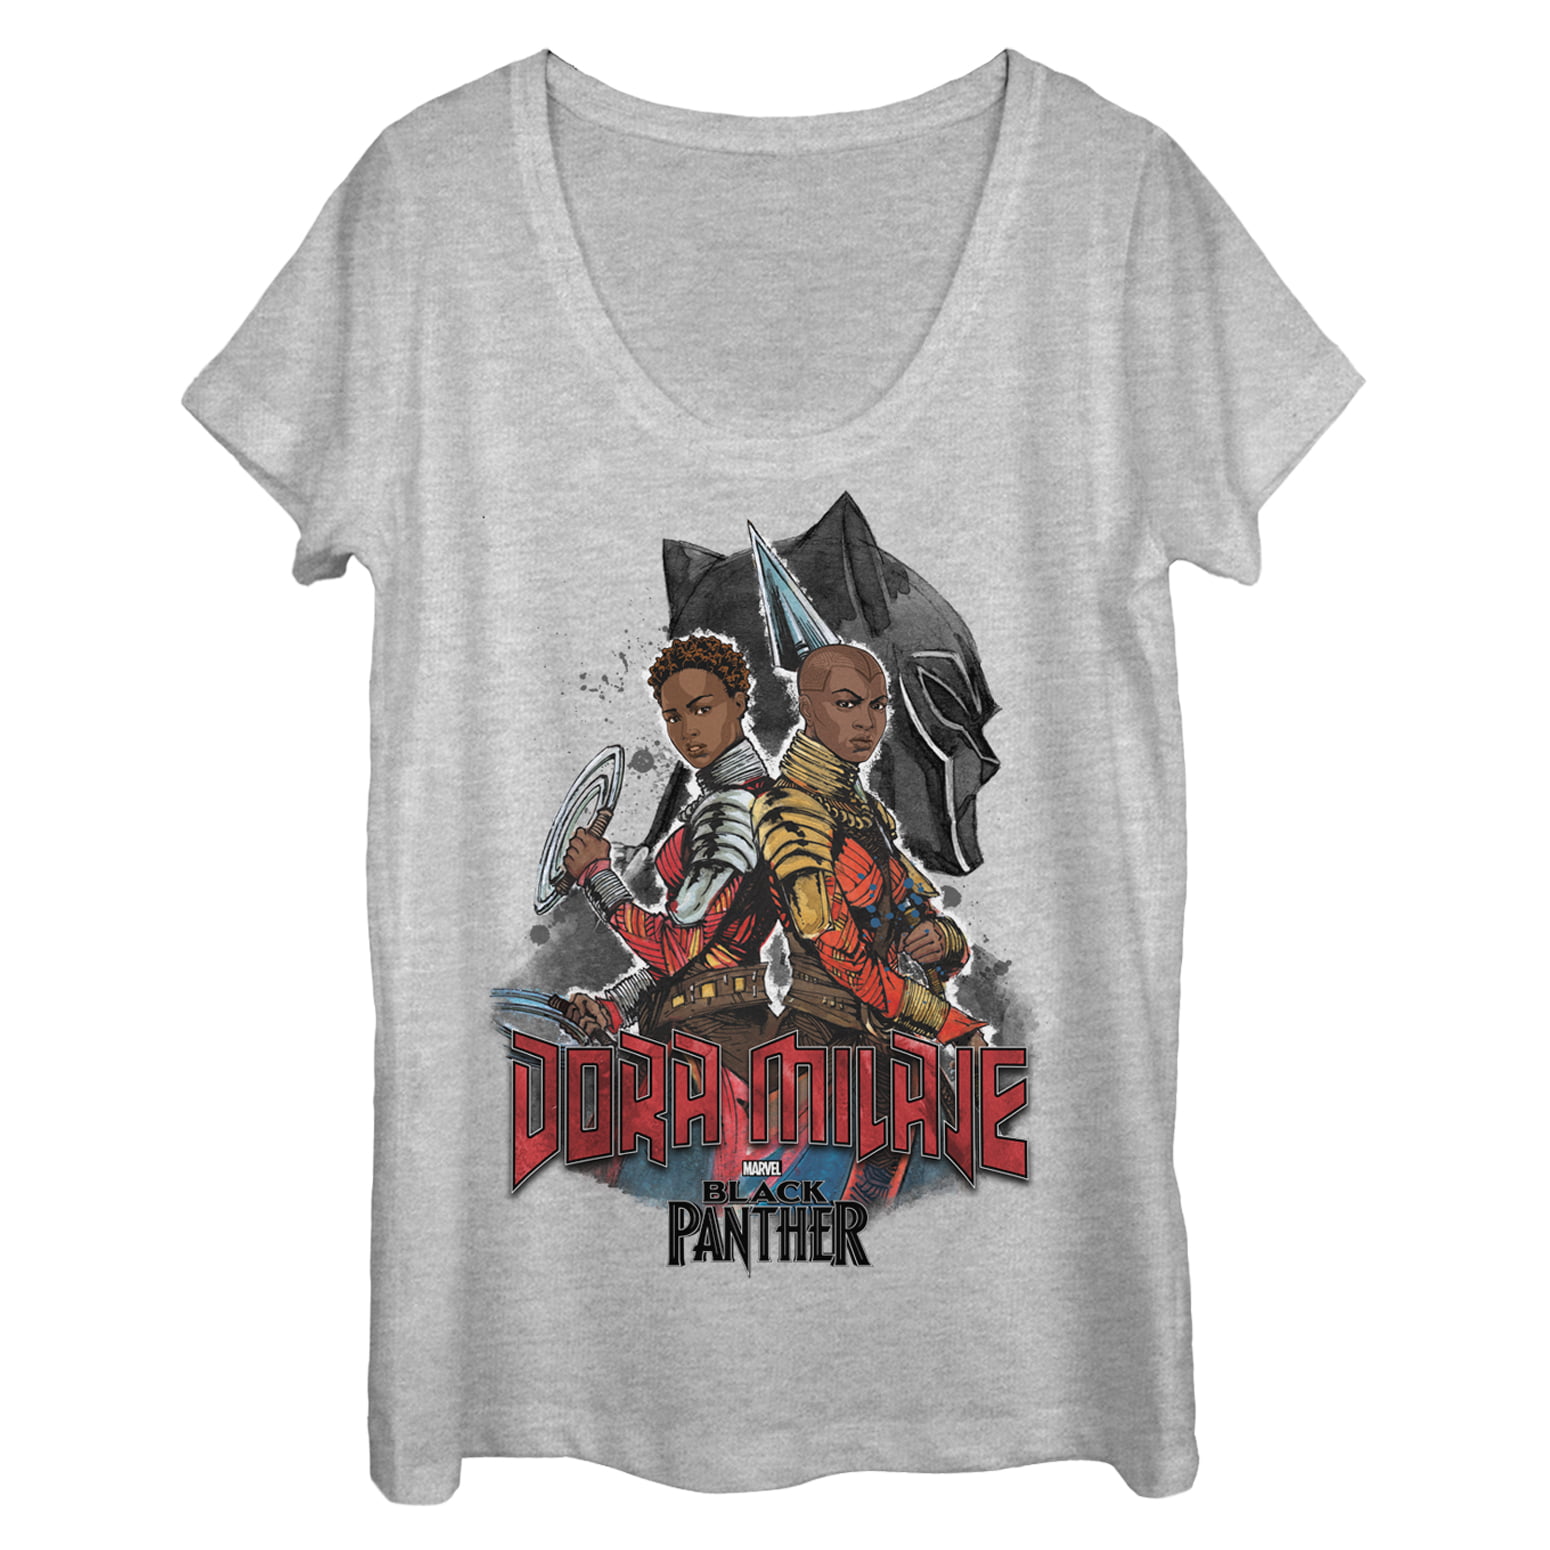 panthers t shirts for women